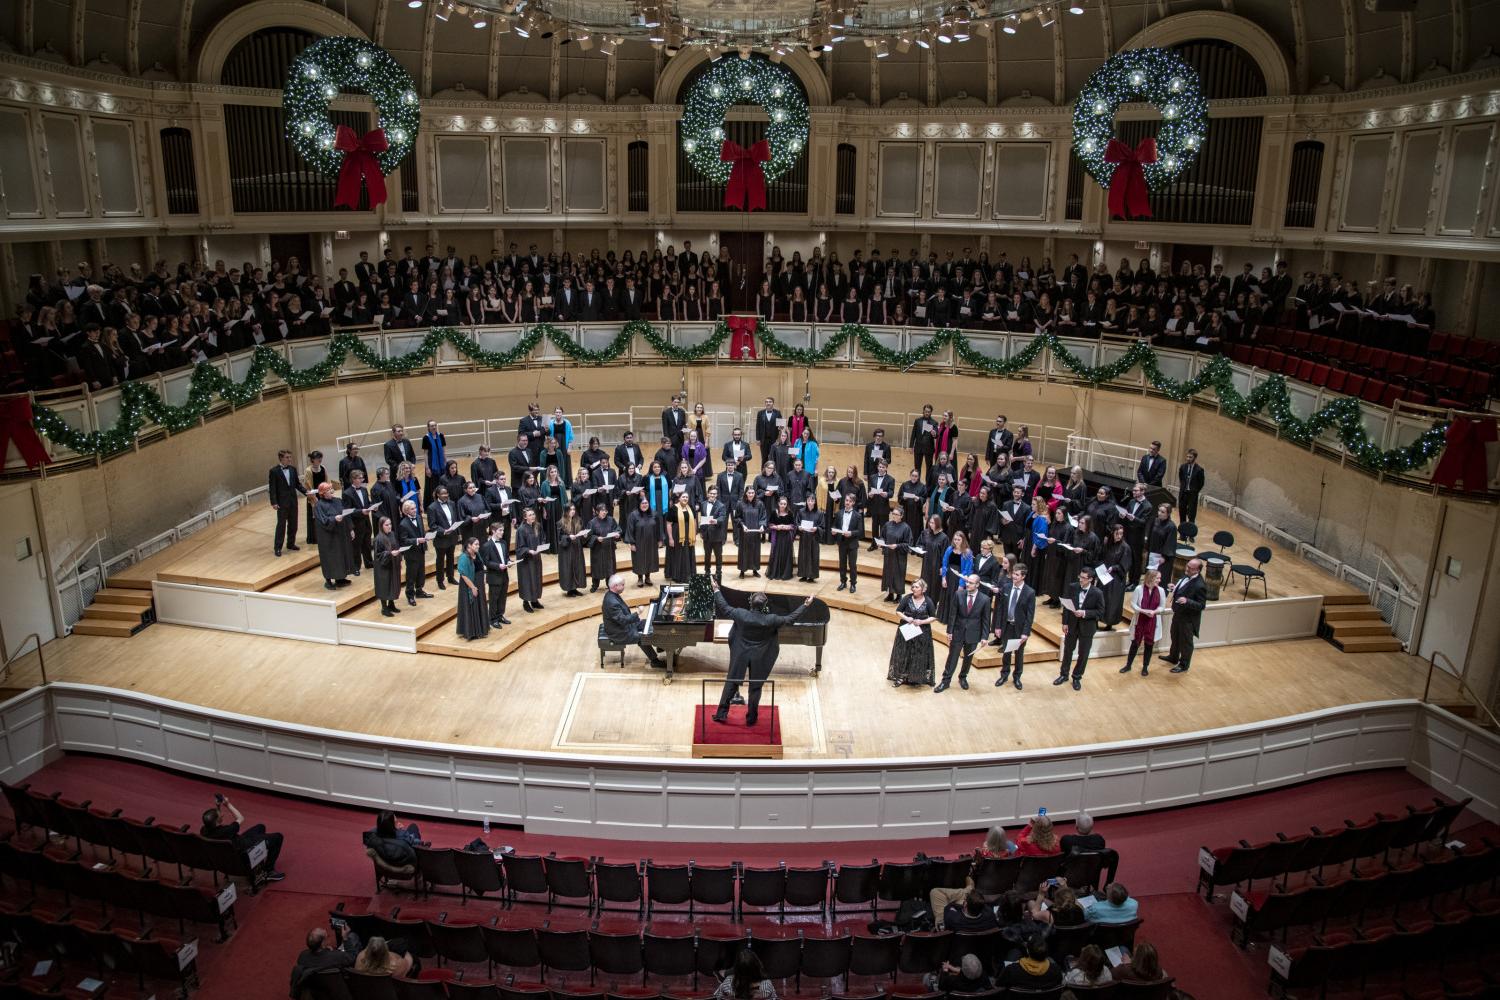 The <a href='http://d.zcqwtzb.com/'>bv伟德ios下载</a> Choir performs in the Chicago Symphony Hall.